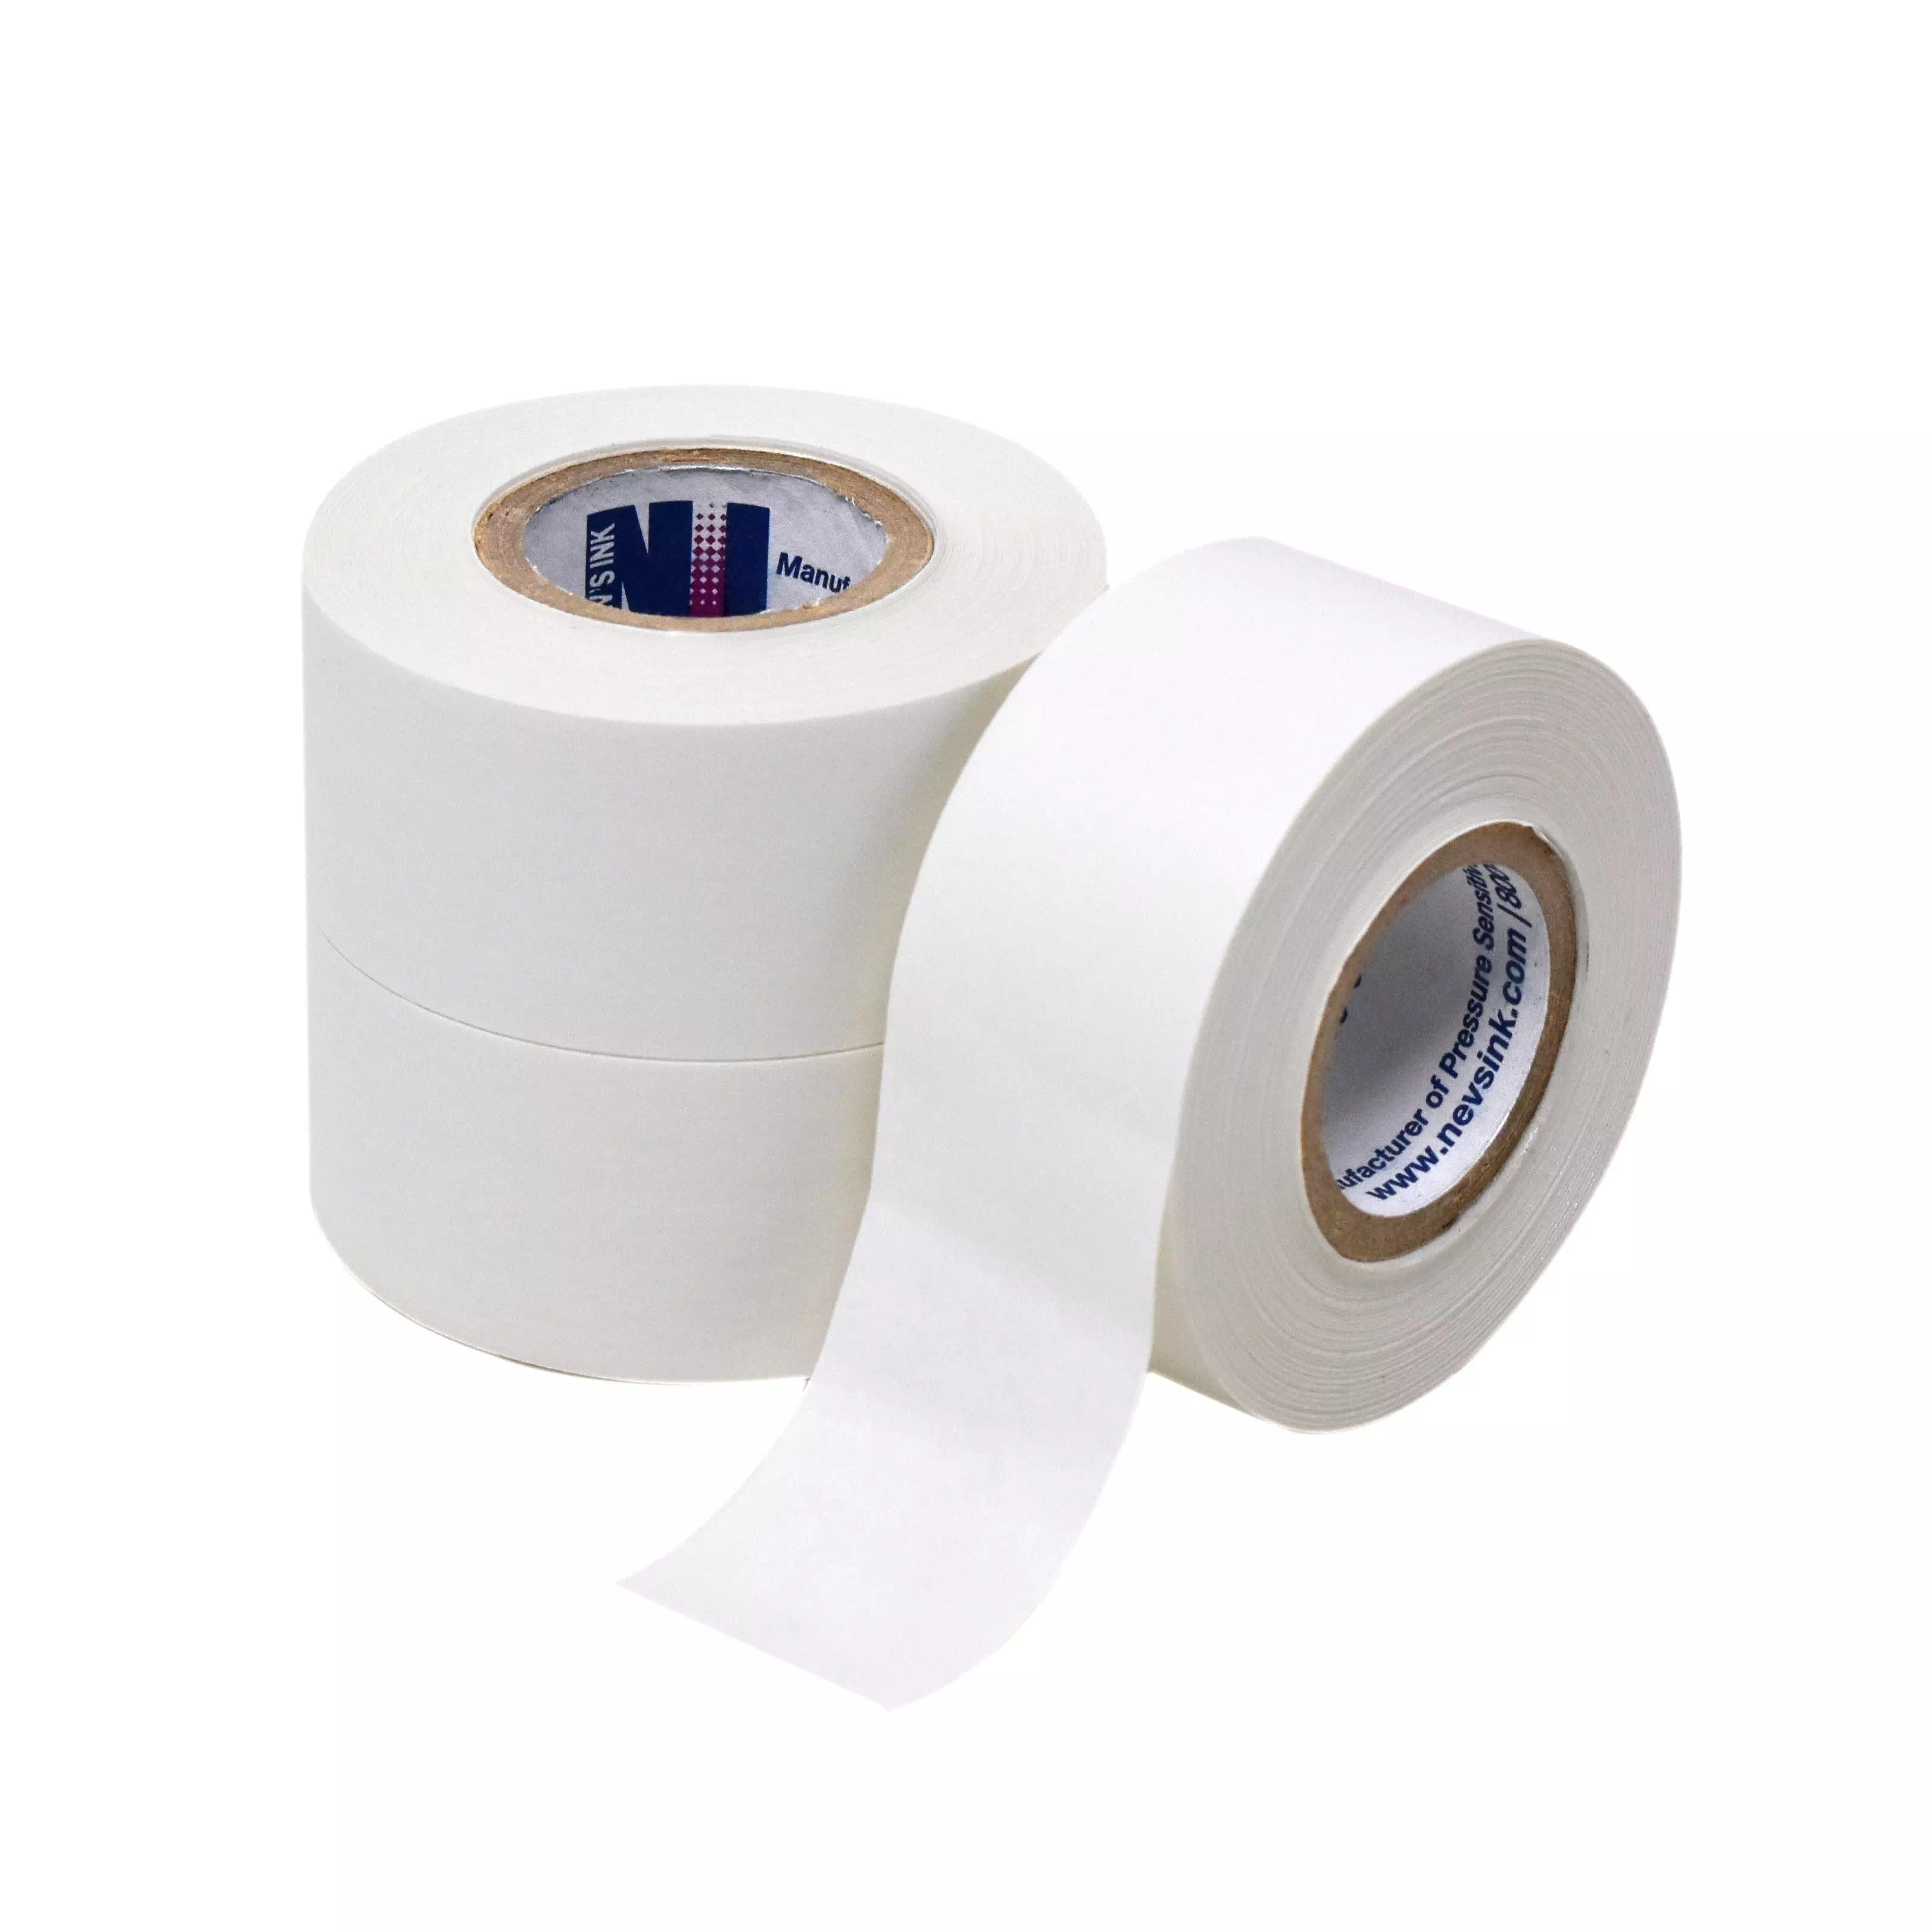 Lab Labeling Tape Variety Pack, 500 Length x 3/4 Width, 1 inch Core [3 Rolls of Assorted Colors]